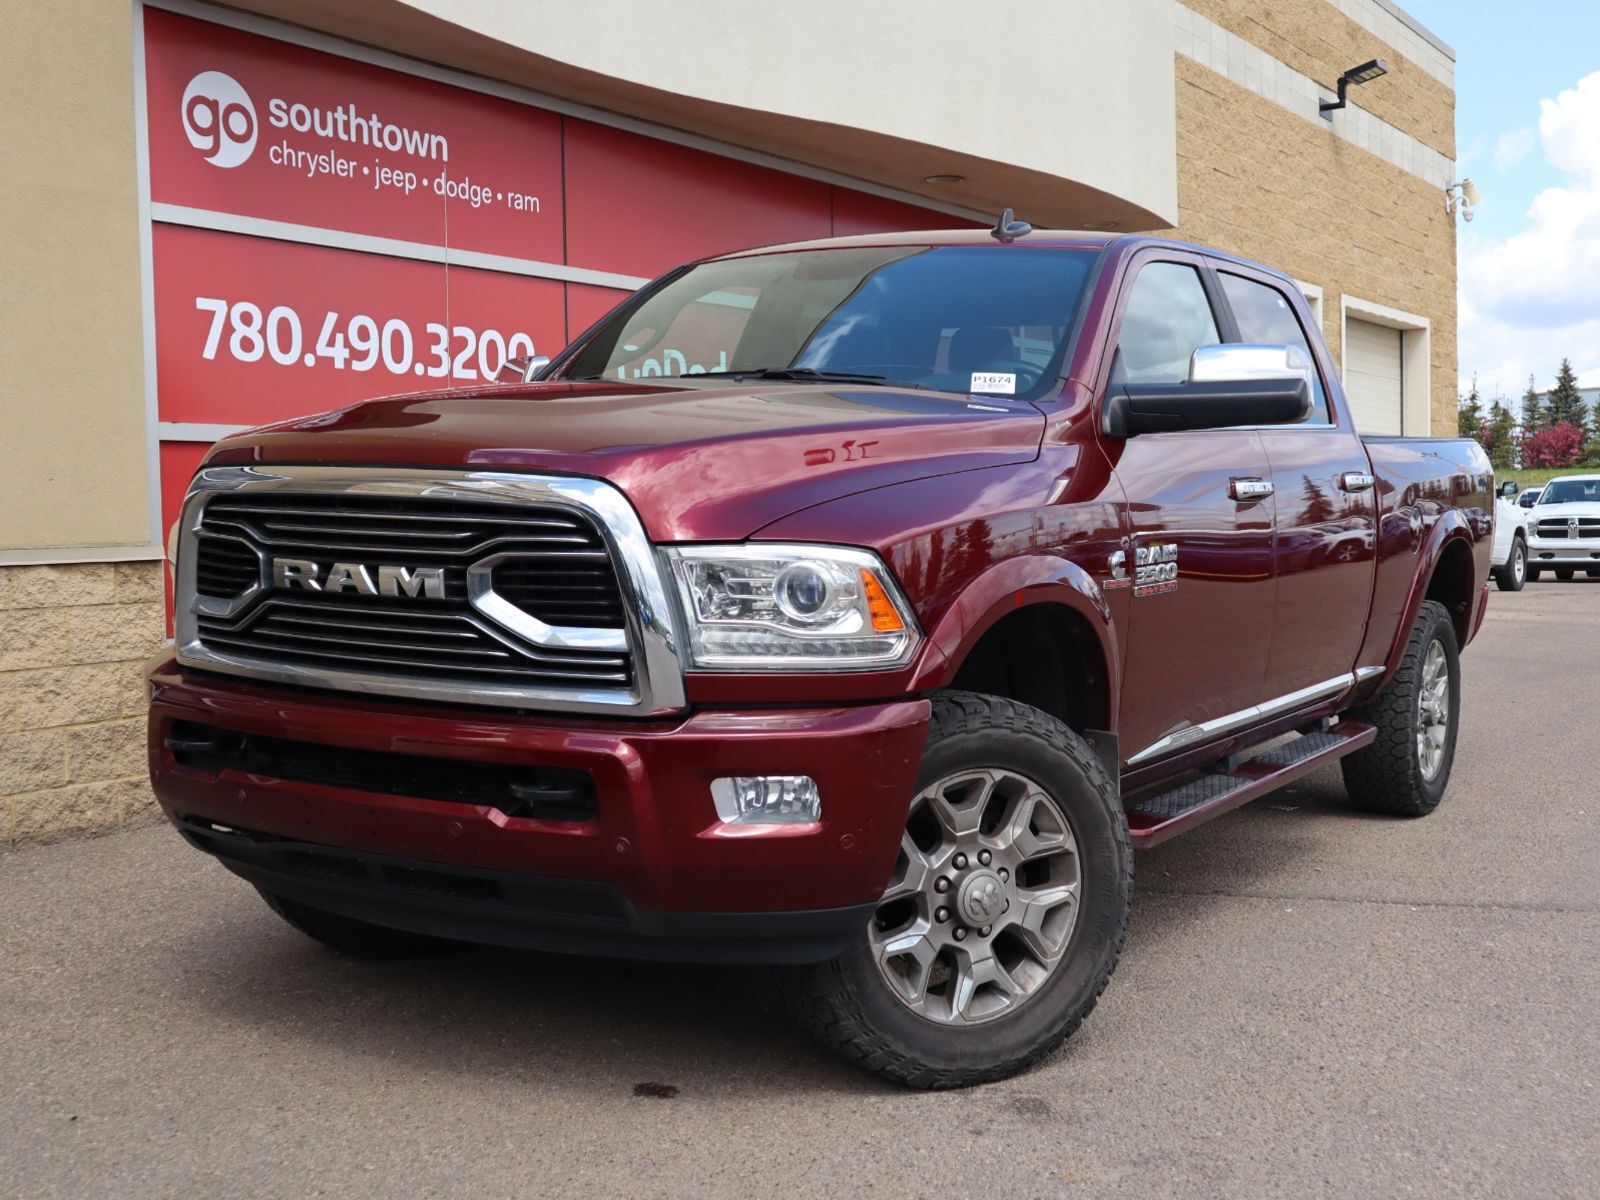 2018 Ram 3500 LIMITED IN RED PEARL EQUIPPED WITH A 6.7L CUMMINS 